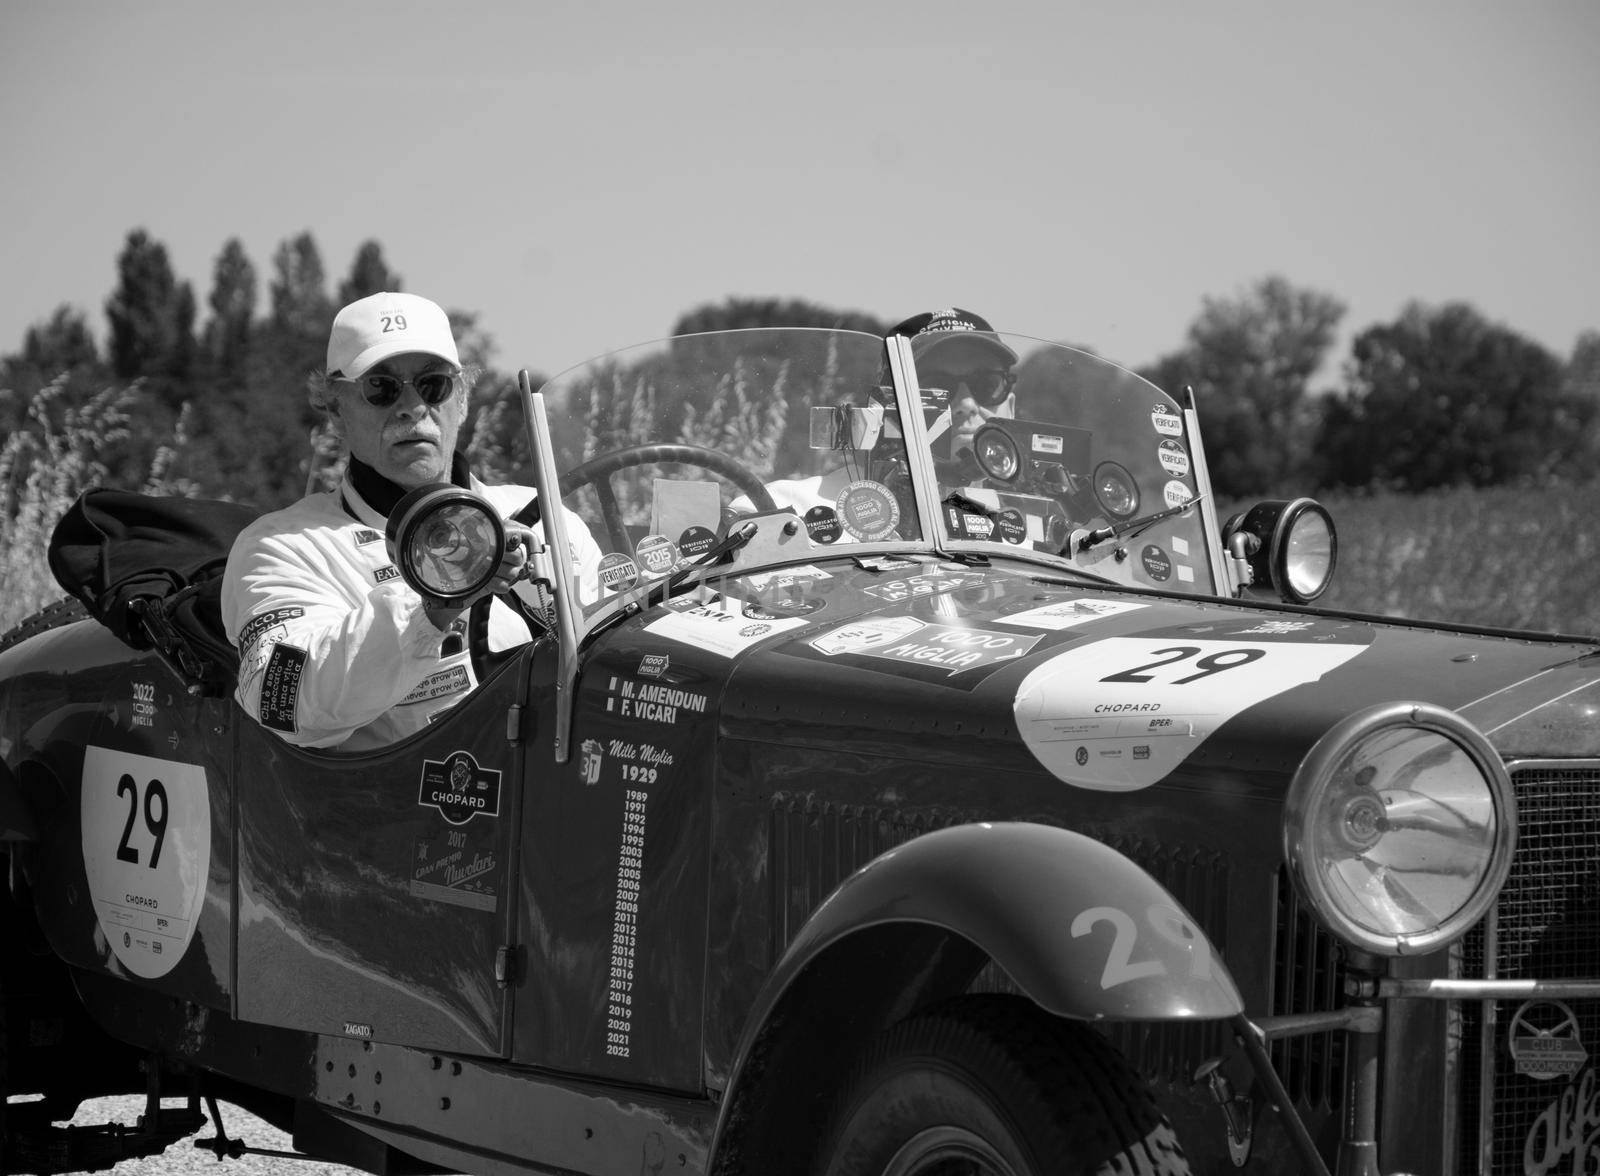 ALFA ROMEO 6C 1500 SS MM 1928 on an old racing car in rally Mille Miglia 2022 the famous italian historical race (1927-1957 by massimocampanari